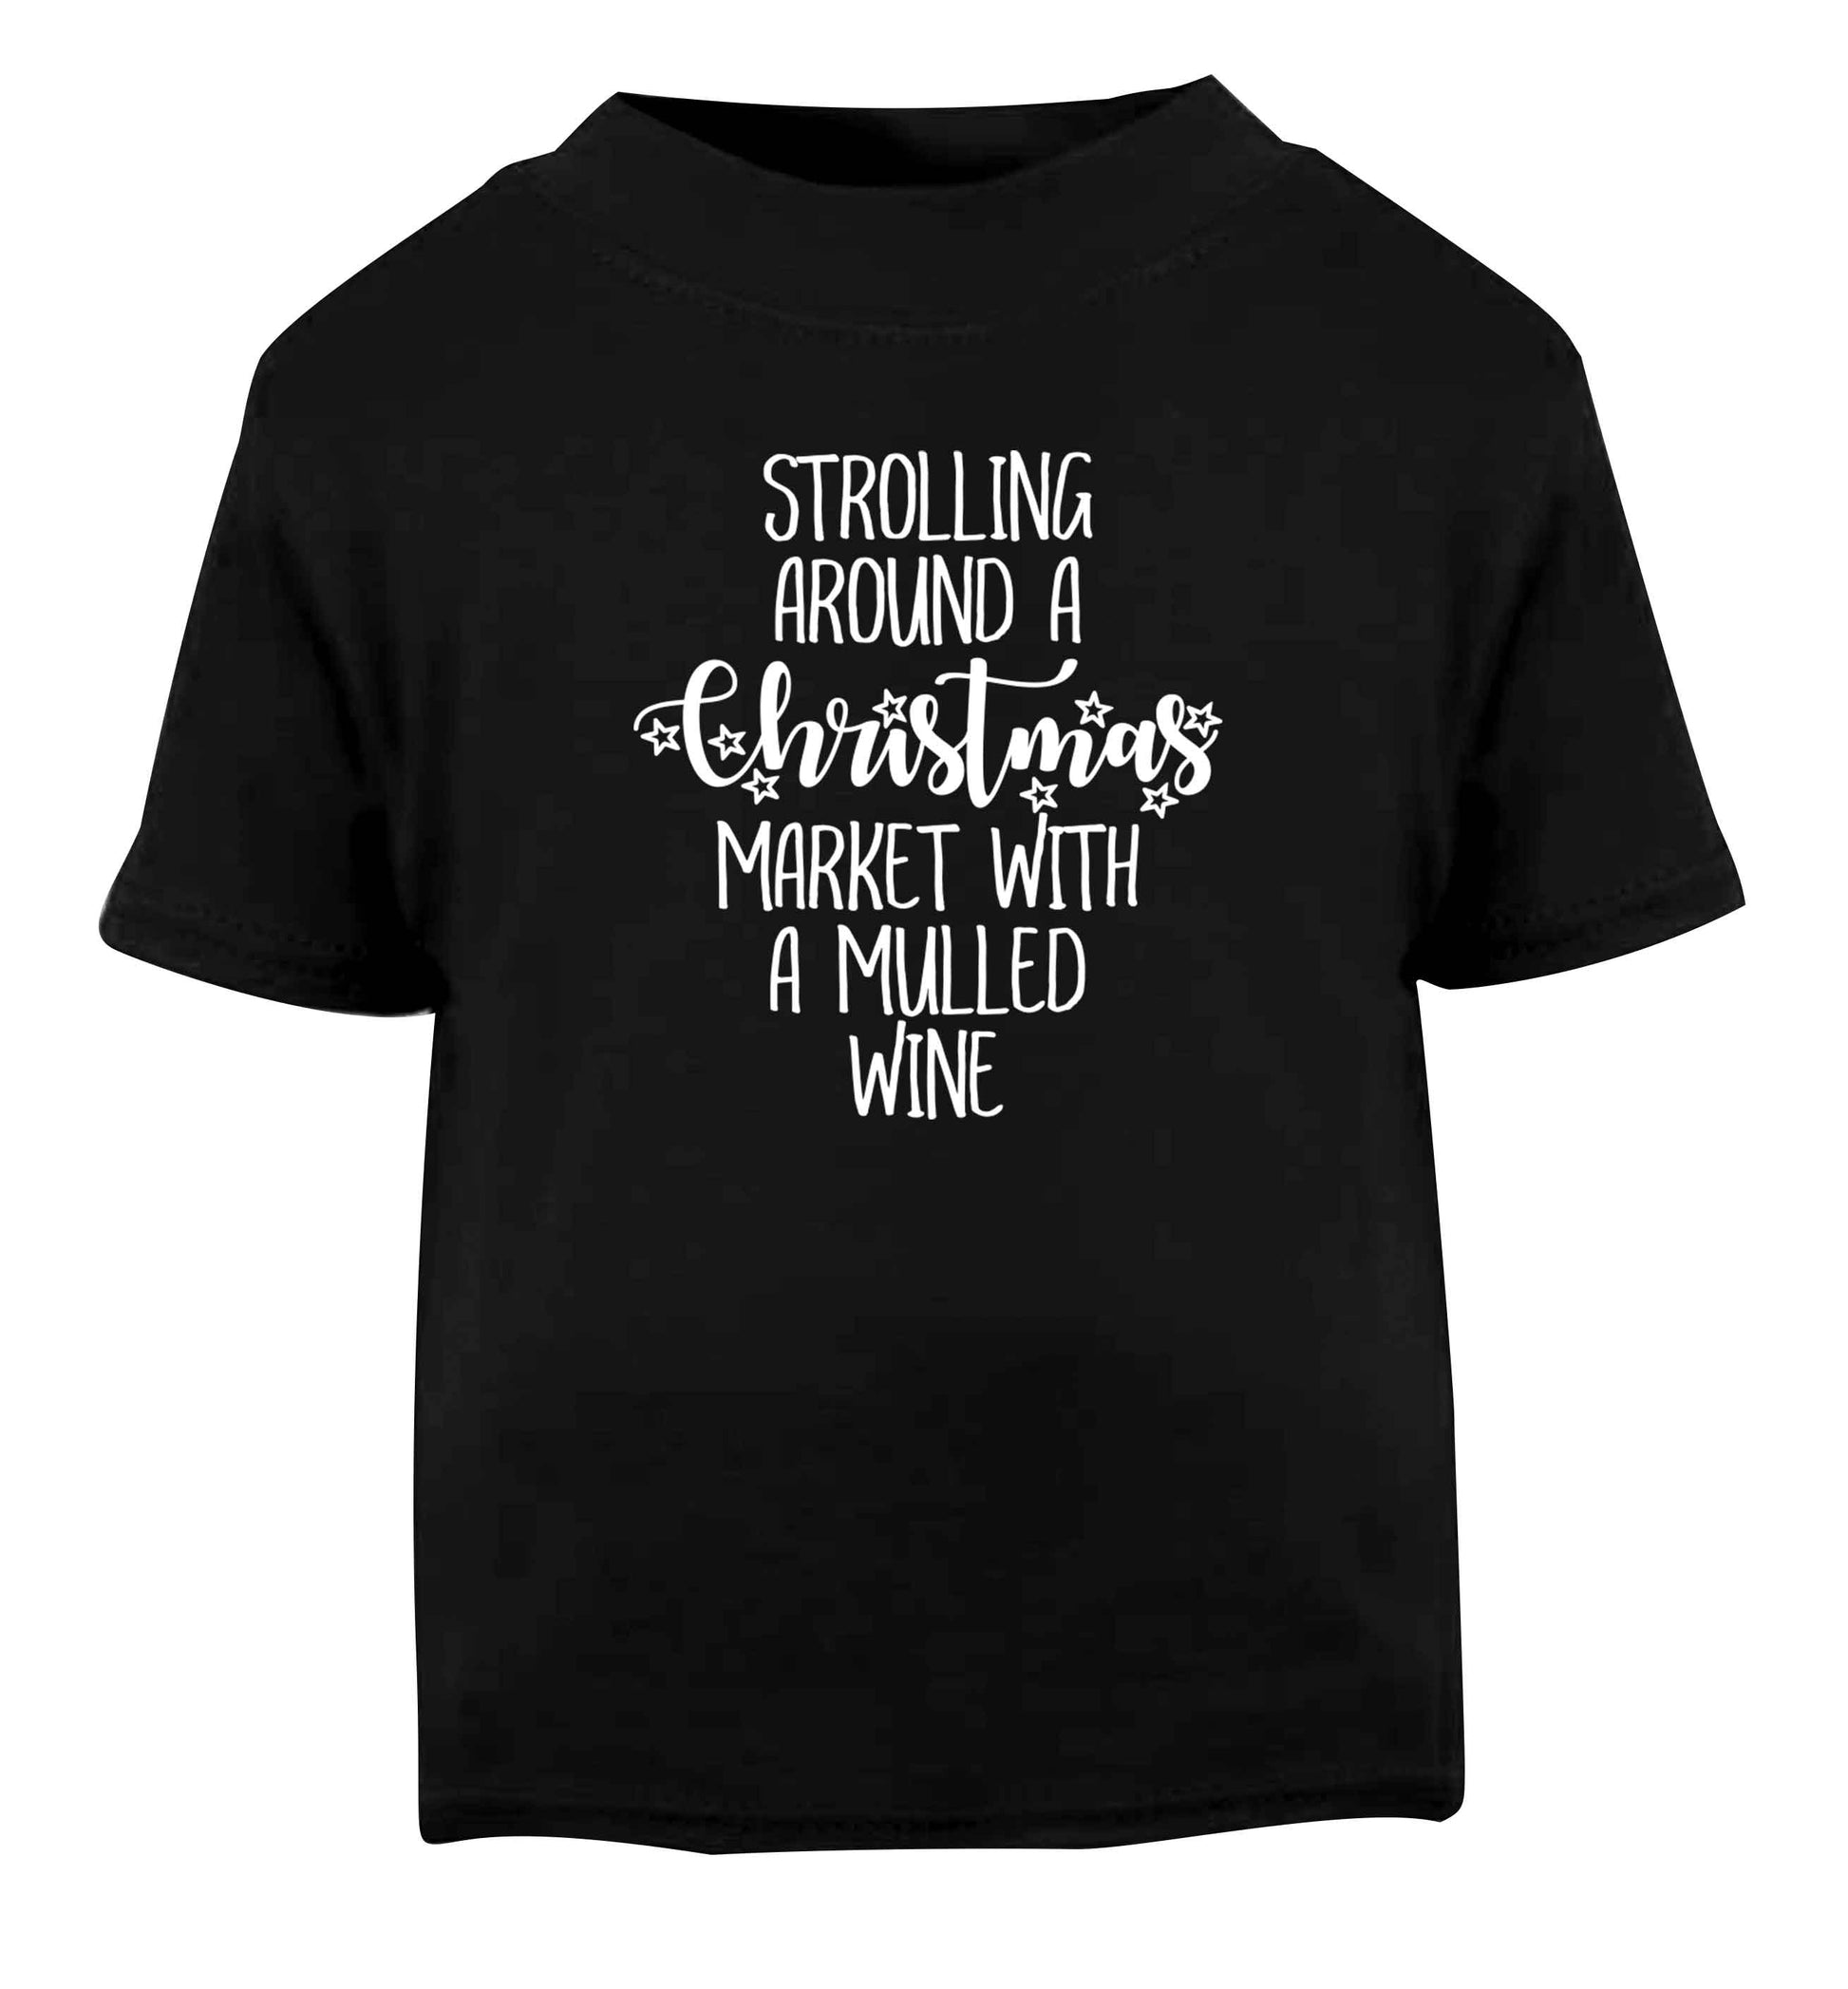 Strolling around a Christmas market with mulled wine Black Baby Toddler Tshirt 2 years